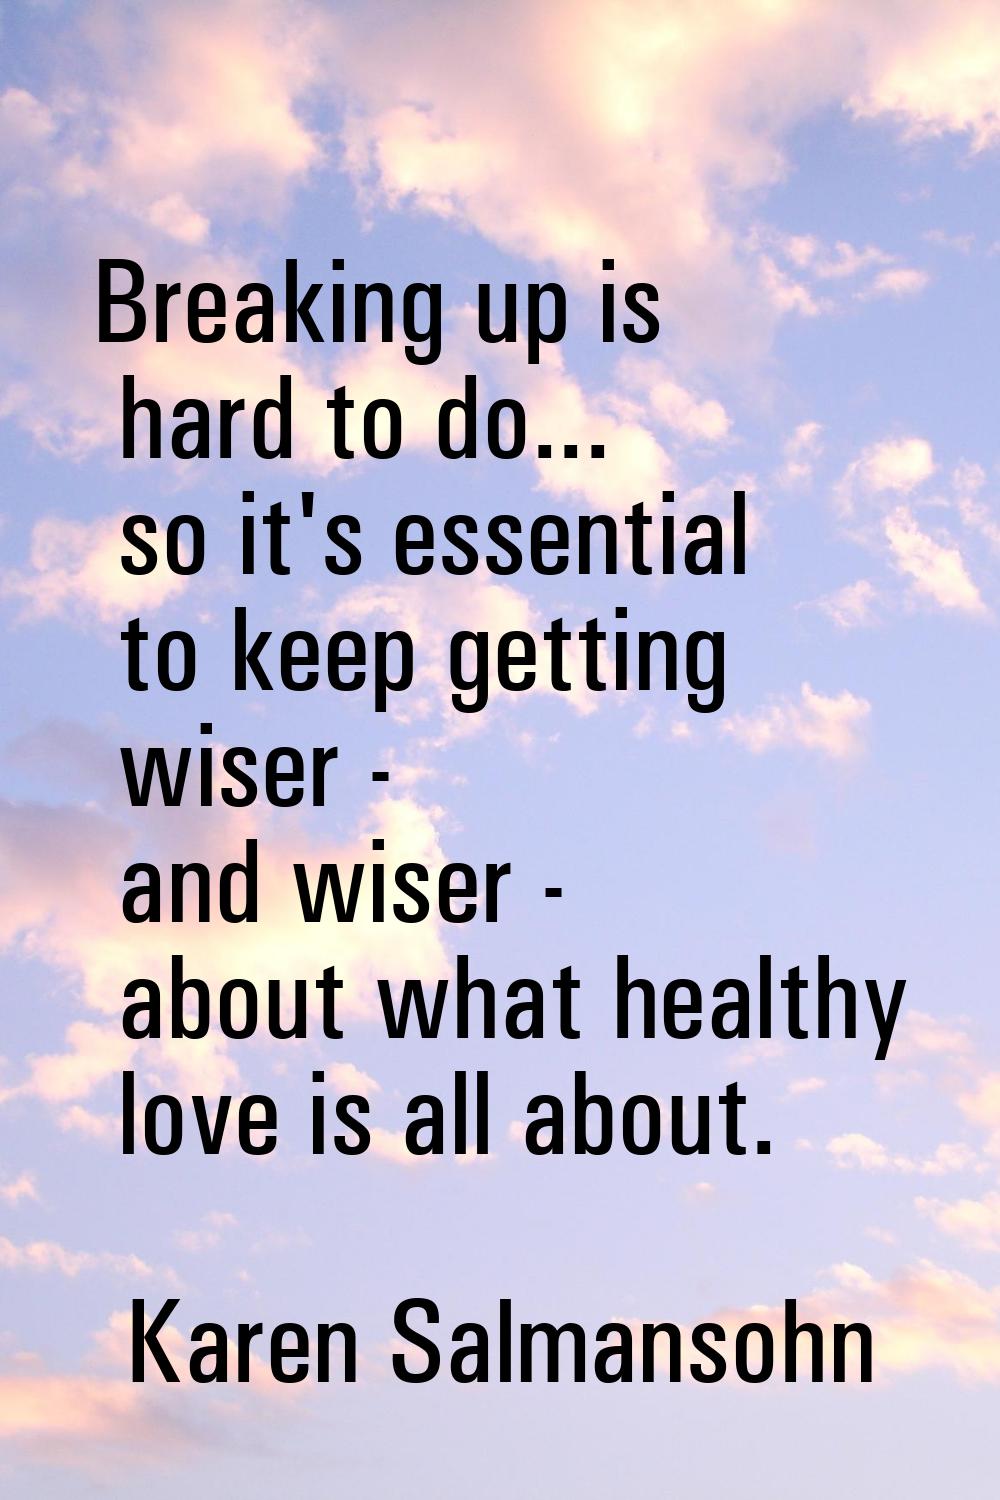 Breaking up is hard to do... so it's essential to keep getting wiser - and wiser - about what healt